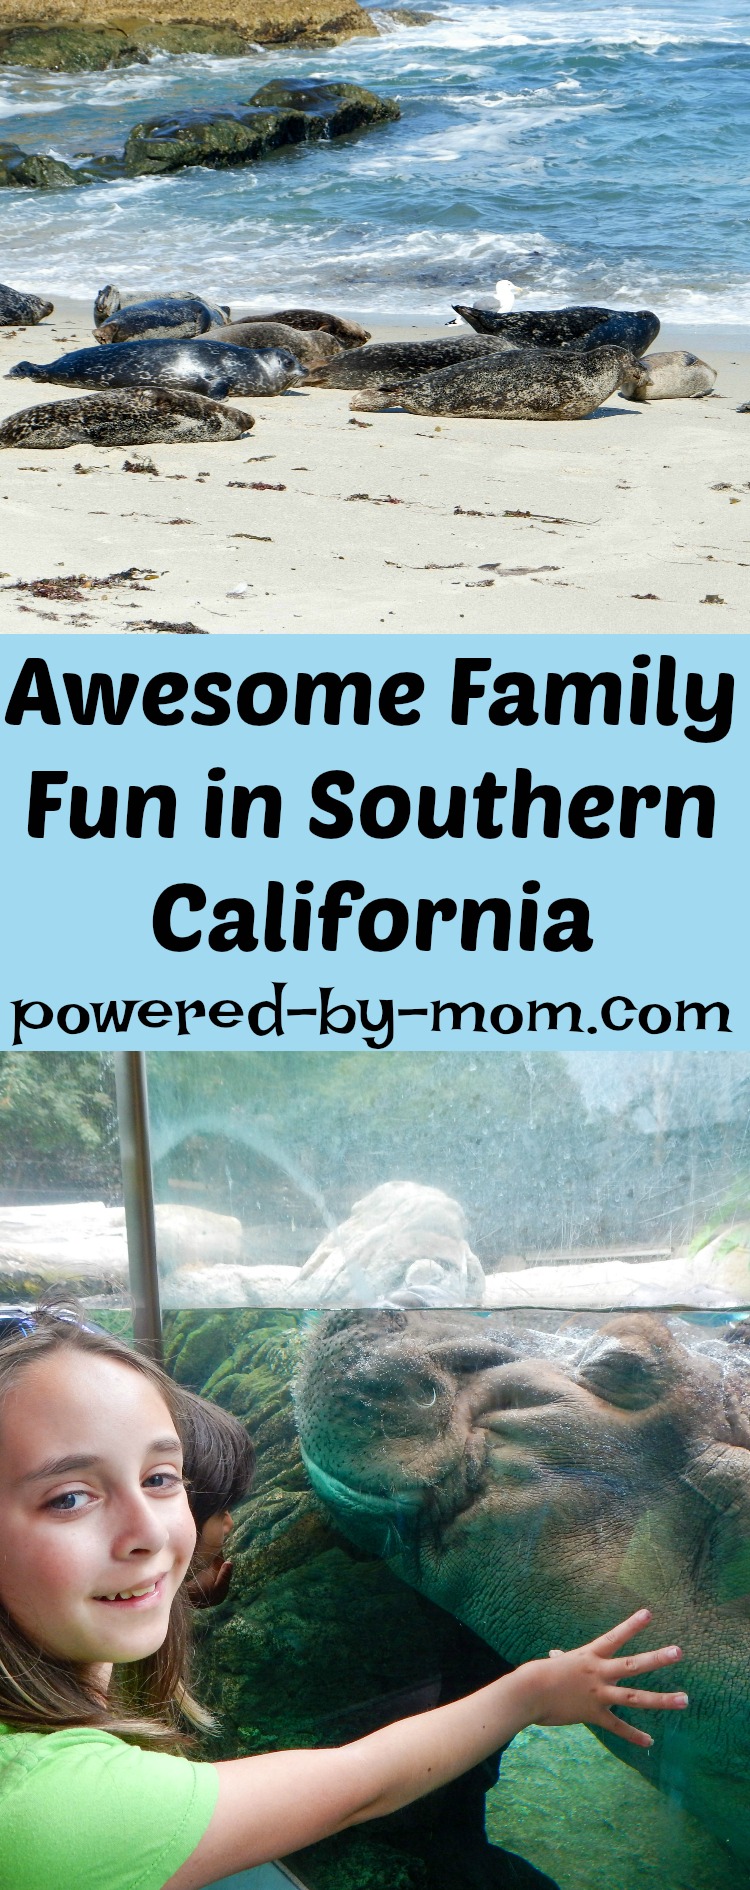 kid-friendly places in Southern California - La Jolla seals and sea lions childrens pool